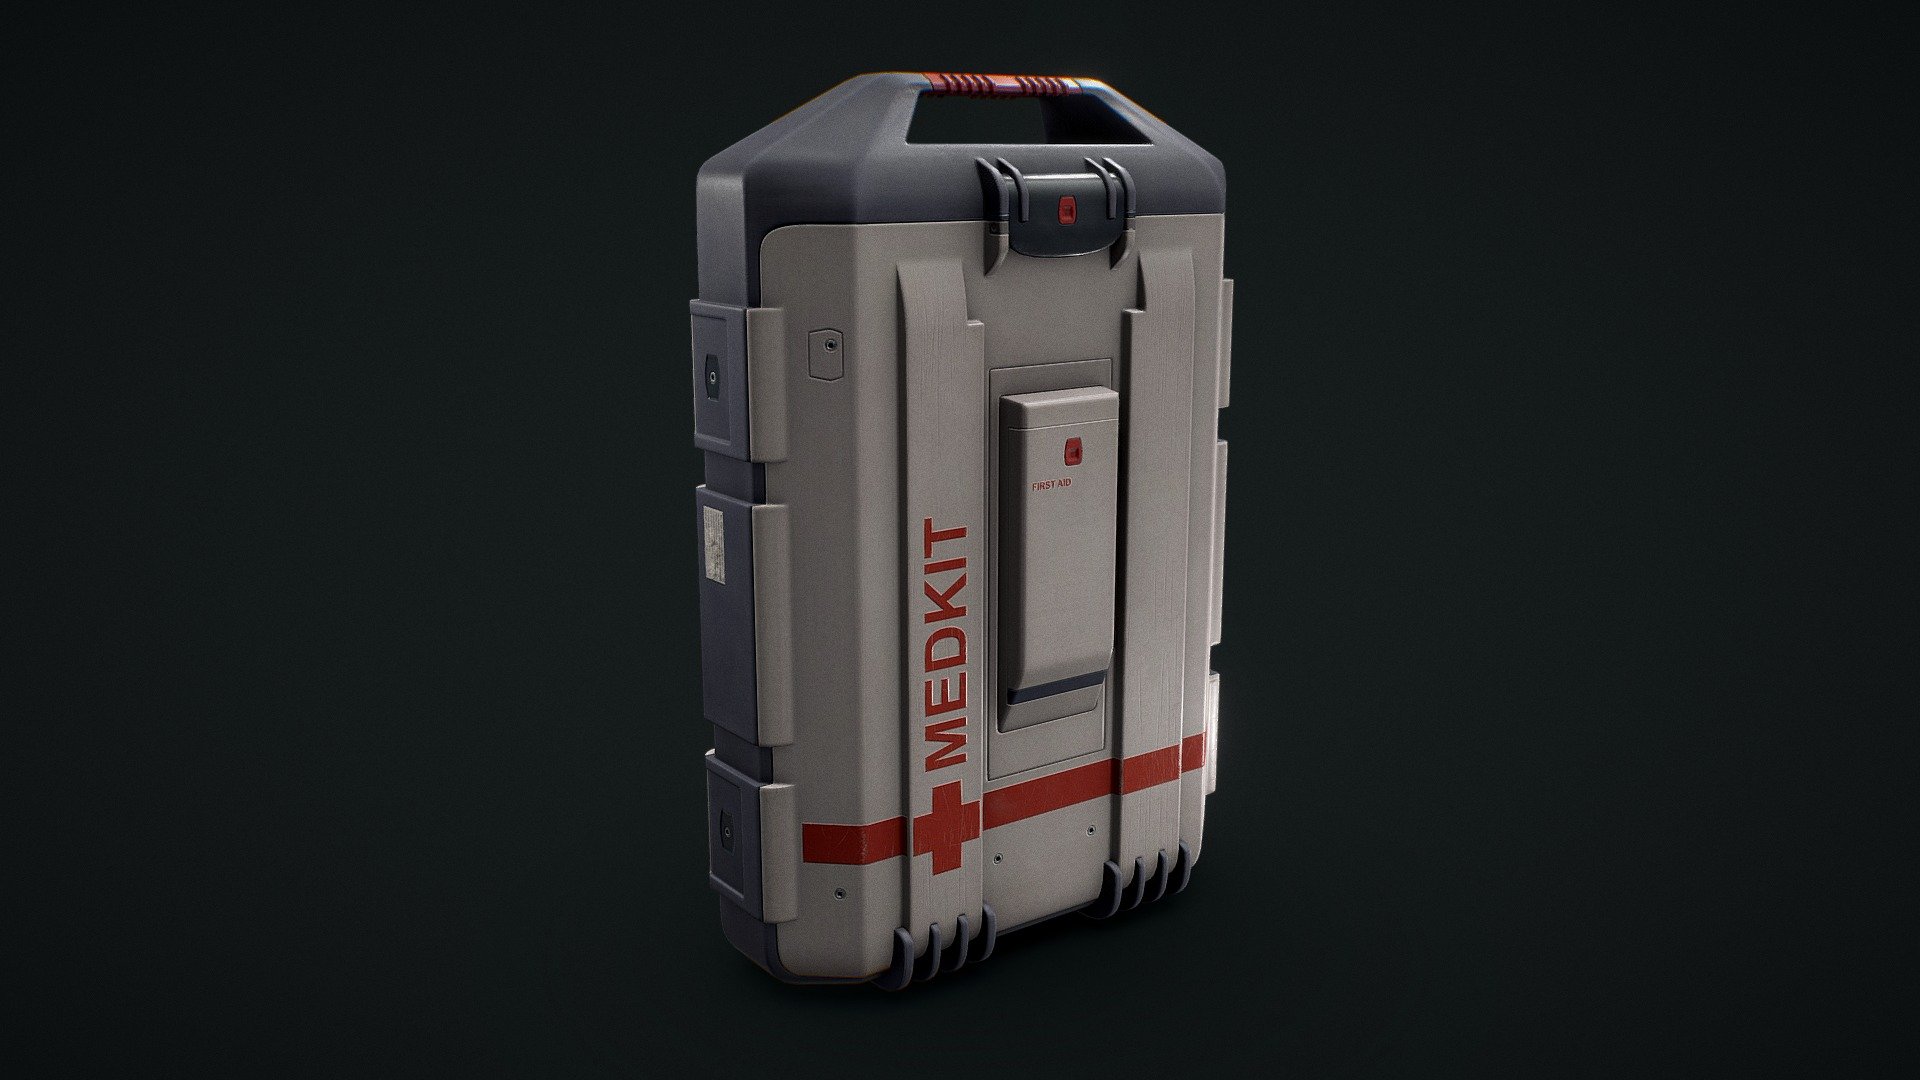 Medkit Game ready asset
Hello! Long time since my last publication and now I'm back with good stuff!
SEE THIS MODEL ON ARTSTATION

For this one I also did Russian localization.
I used 3ds Max for modeling, RizomUV for UV, Marmoset Toolbag for baking and rendering, texturing in Substance Painter, editing in Photoshop.

Work-In-Progress video https://youtu.be/pP2lbaxYatY

Original concept by David Heidhoff


P.S.: 1 texture set, 2719 Tris
Thanx - Medkit - 3D model by Maria Savelyeva (@erinsavel) 3d model